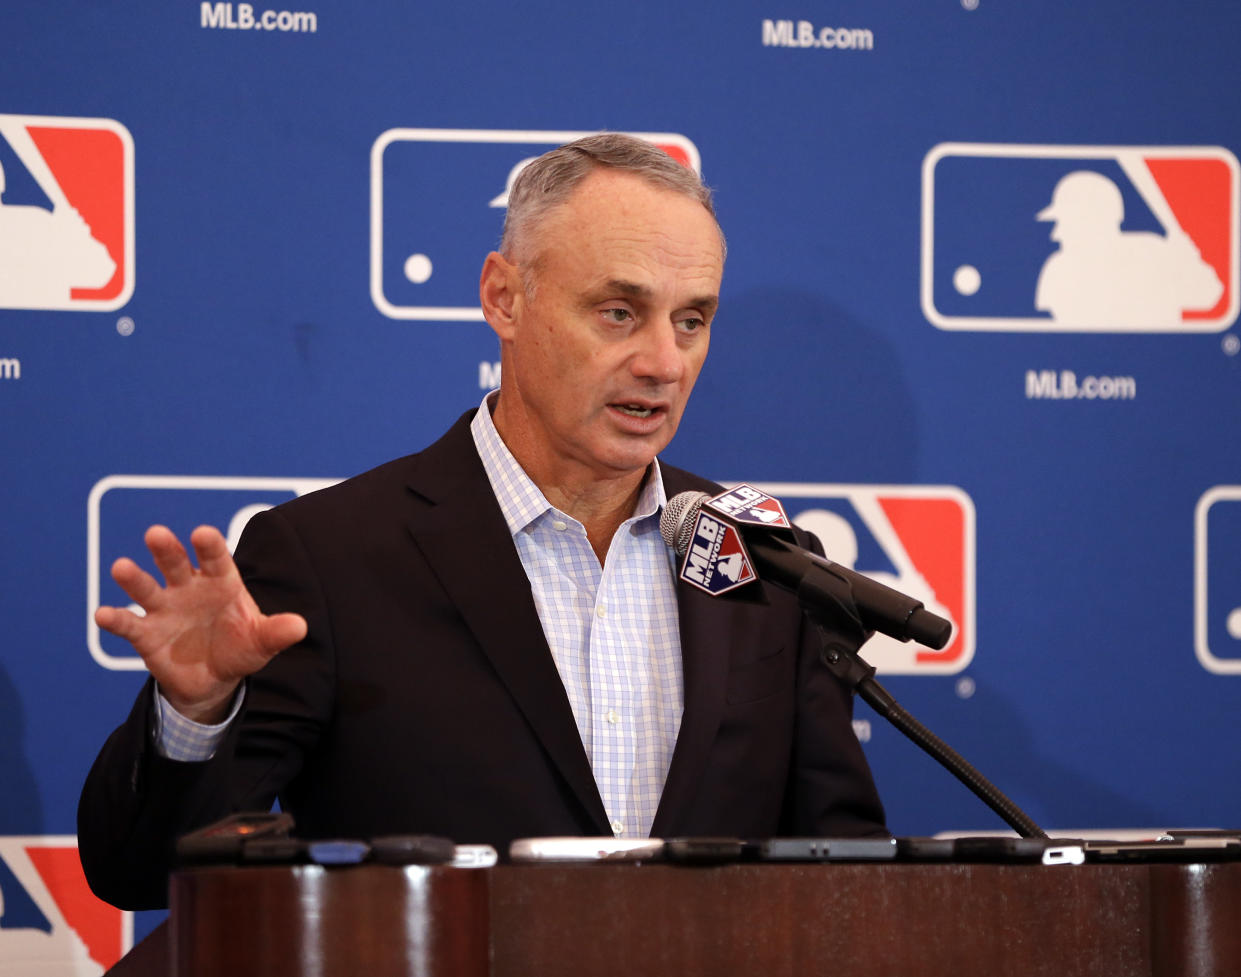 MLB commissioner Rob Manfred took a lot of heat from Miami radio host Dan Le Batard. (AP)